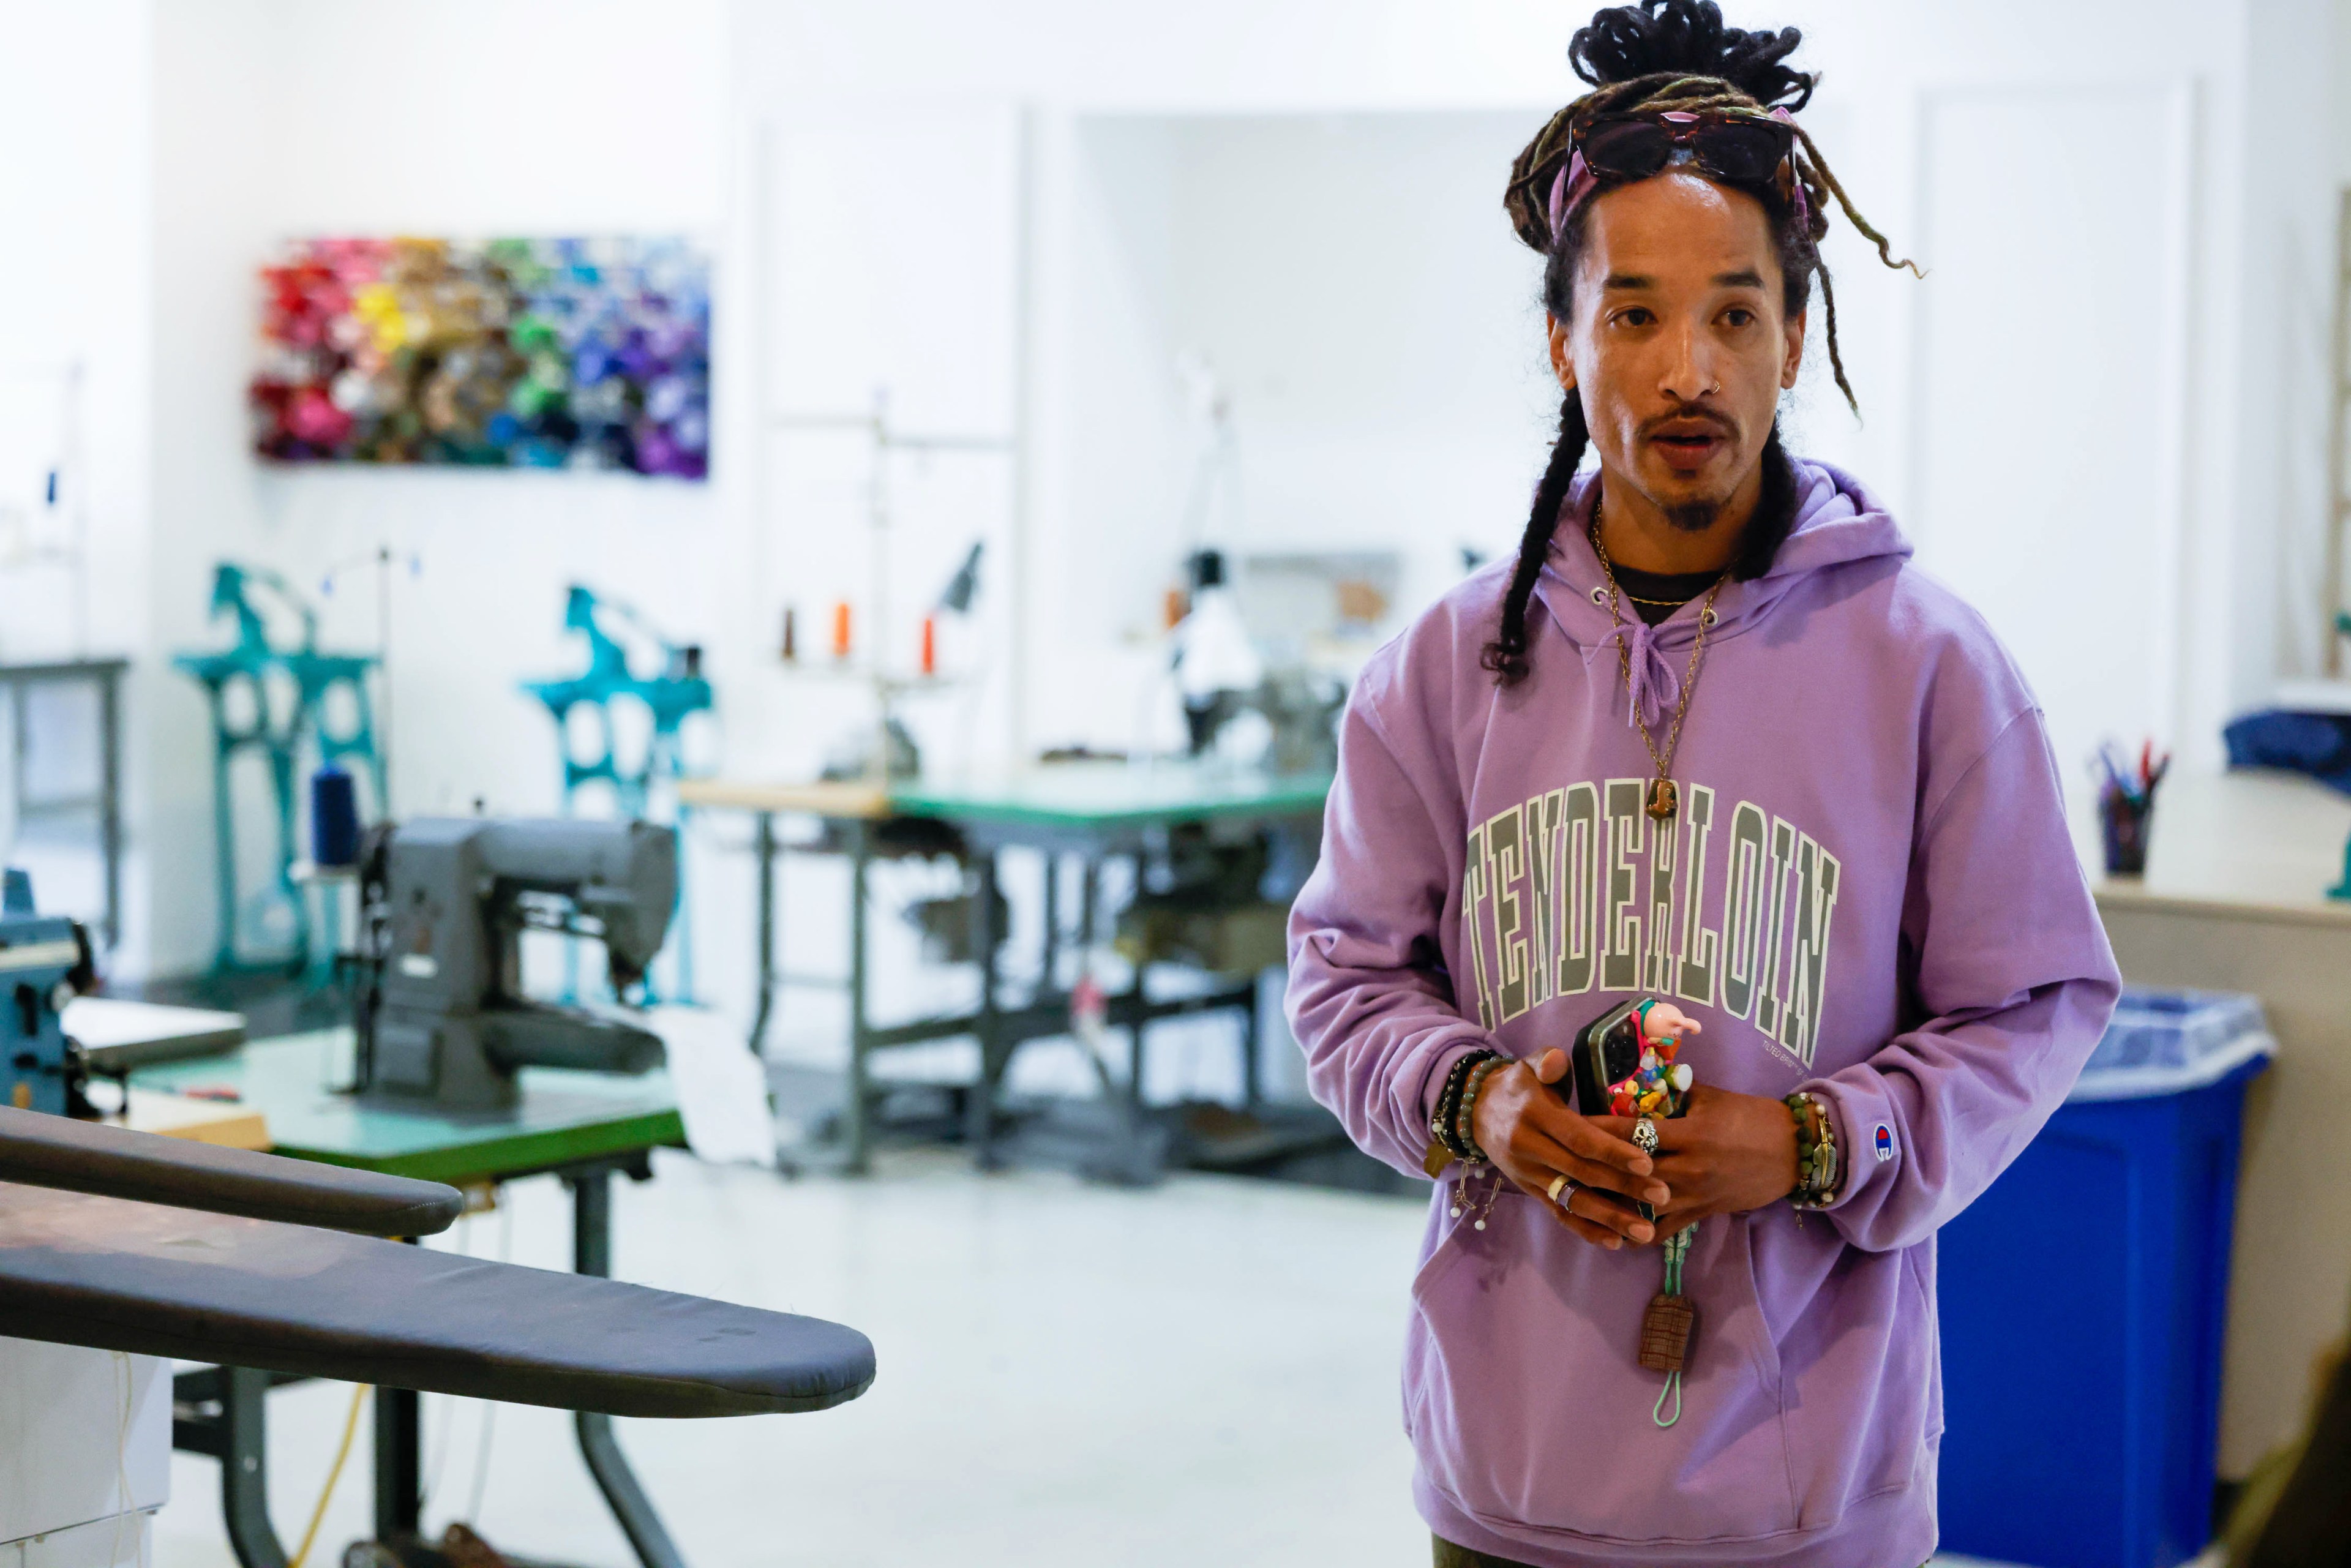 A man stands in a workshop with sewing machines, wearing a purple hoodie and adorned with jewelry.